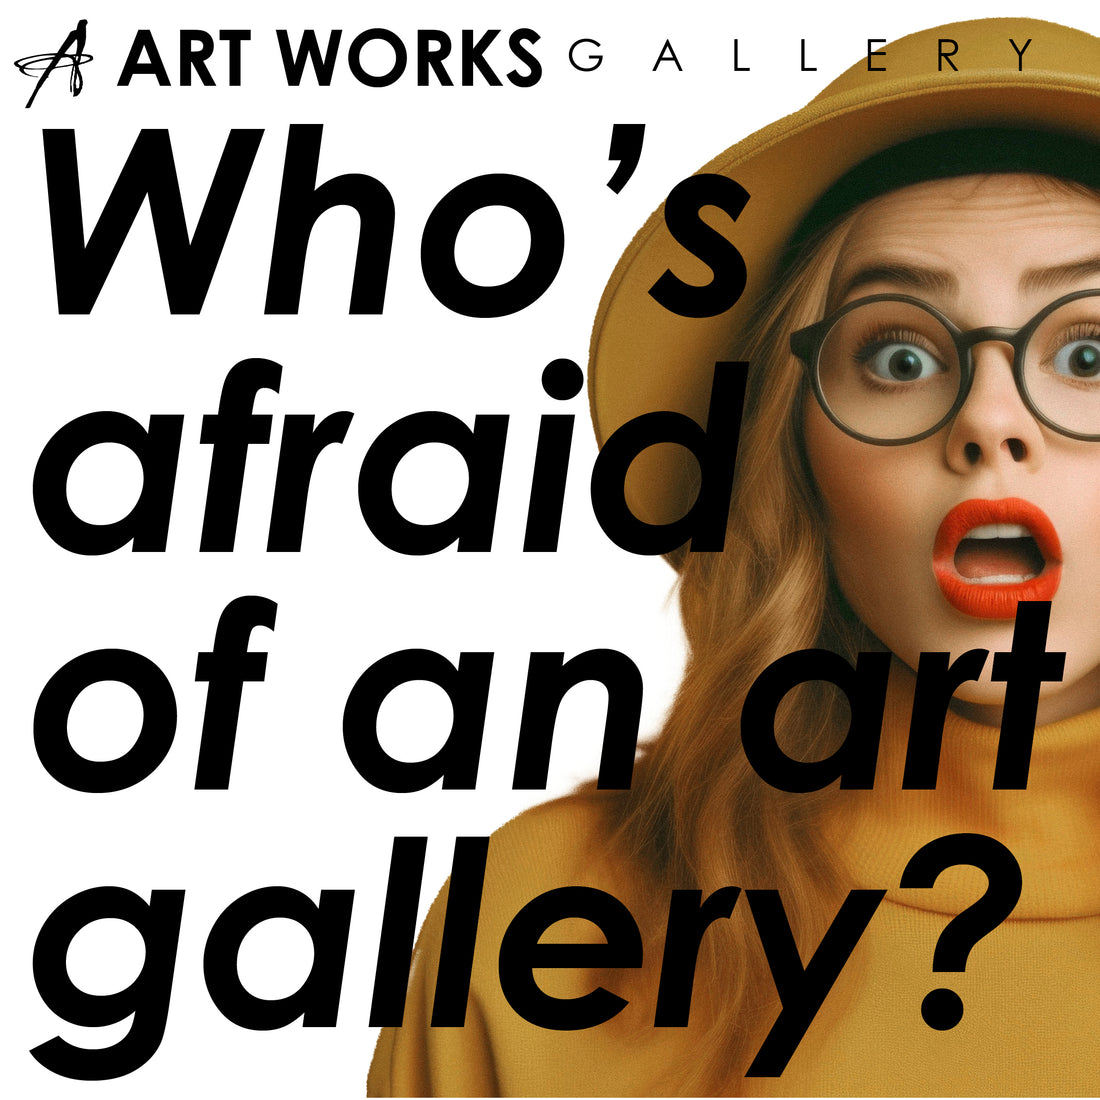 Who's afraid of an art gallery?